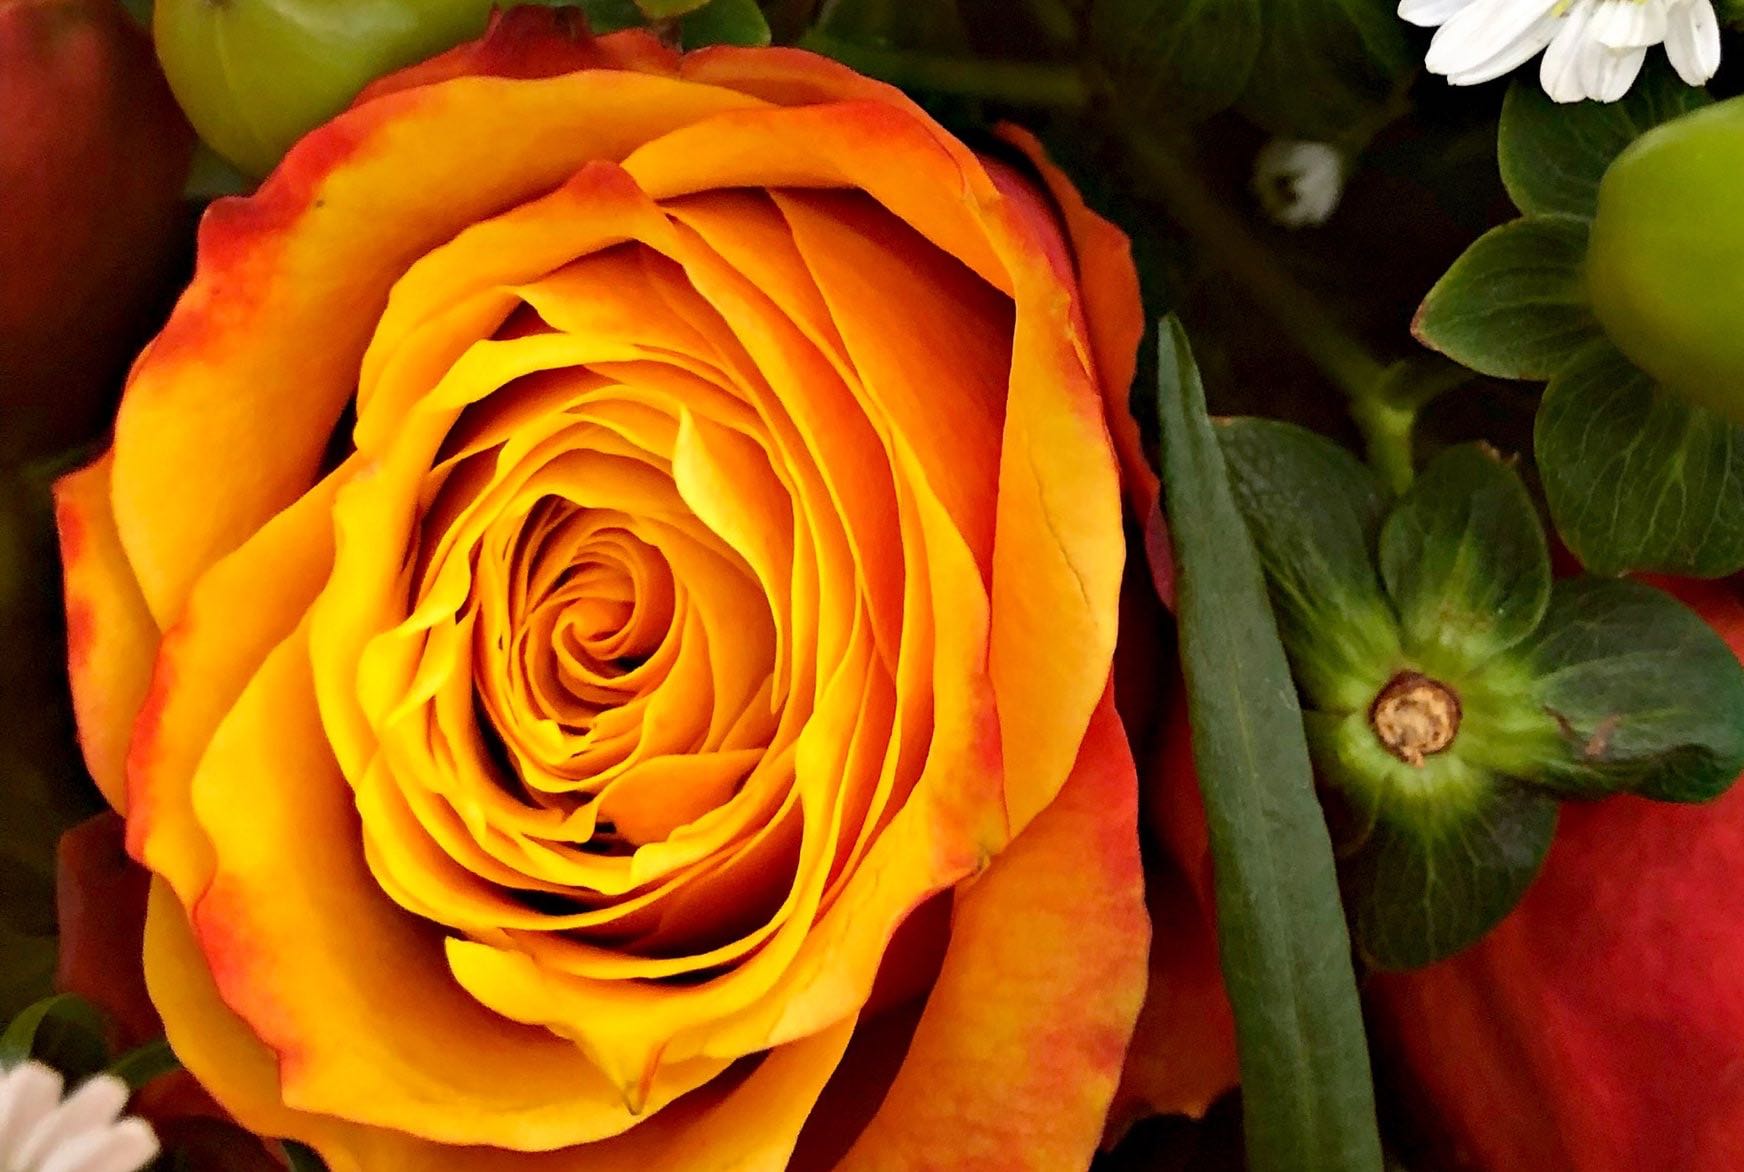 Rose with brilliant orange to yellow colors